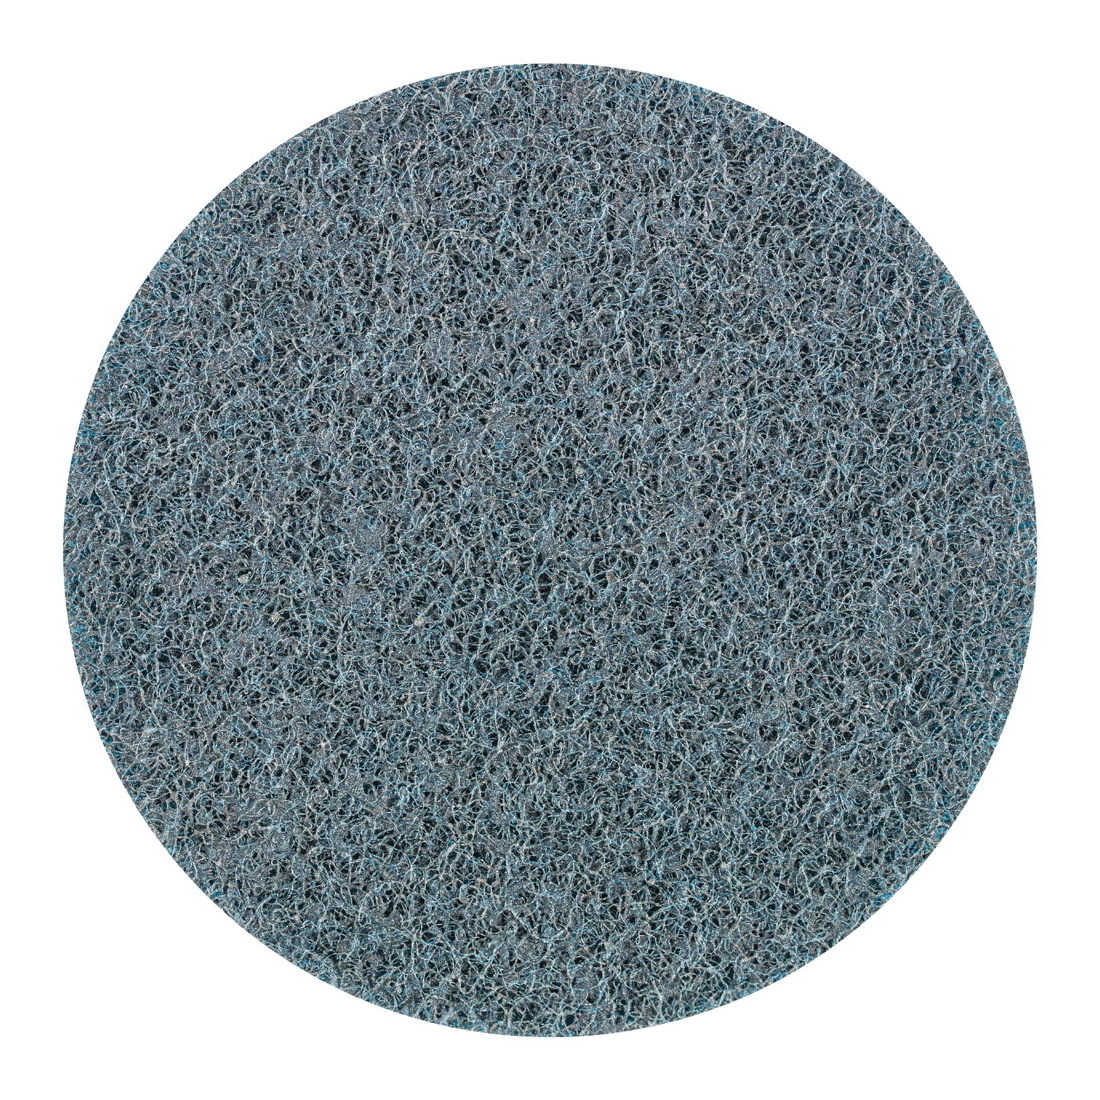 PFERD POLIVLIES® 43449 Non-Woven Abrasive Hook and Loop Disc, 4-1/2 in Dia, 240 Grit, Very Fine Grade, Aluminum Oxide Abrasive